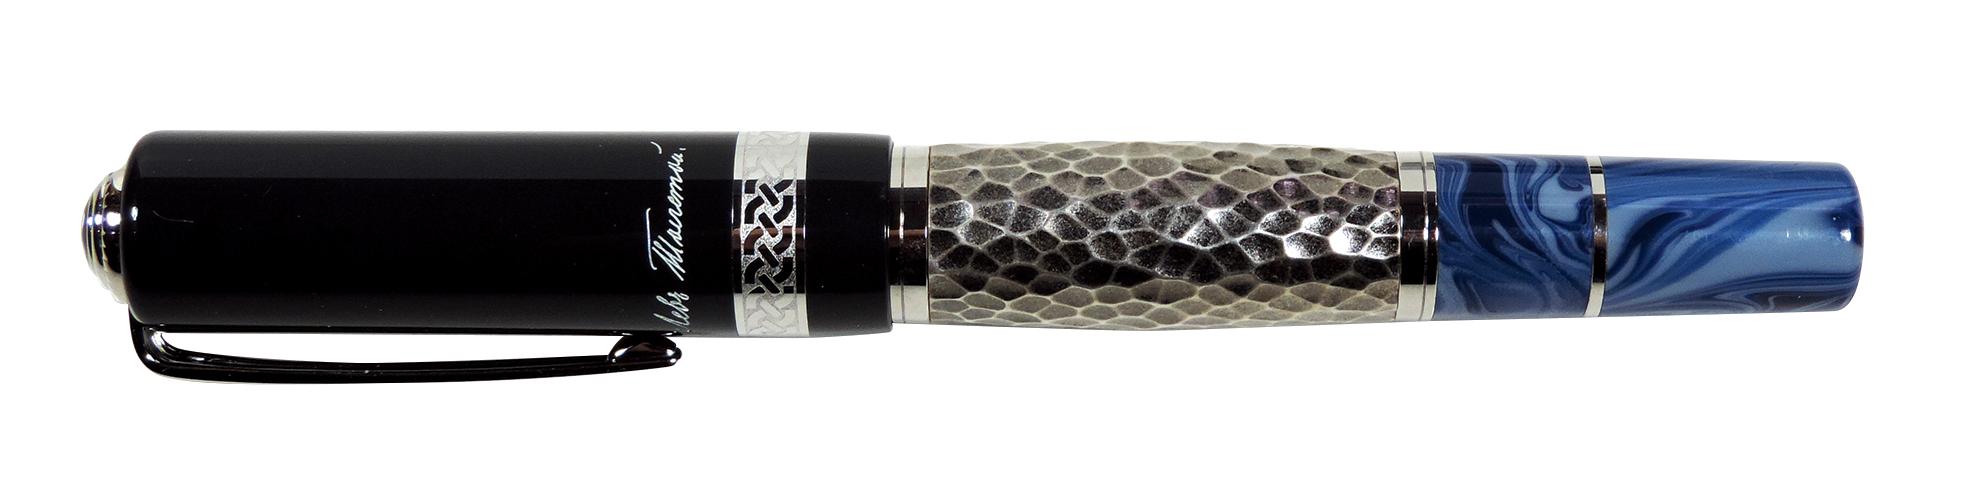 Montblanc Writer's Edition Leo Tolstoy Limited Edition Rollerball Pen. Tols